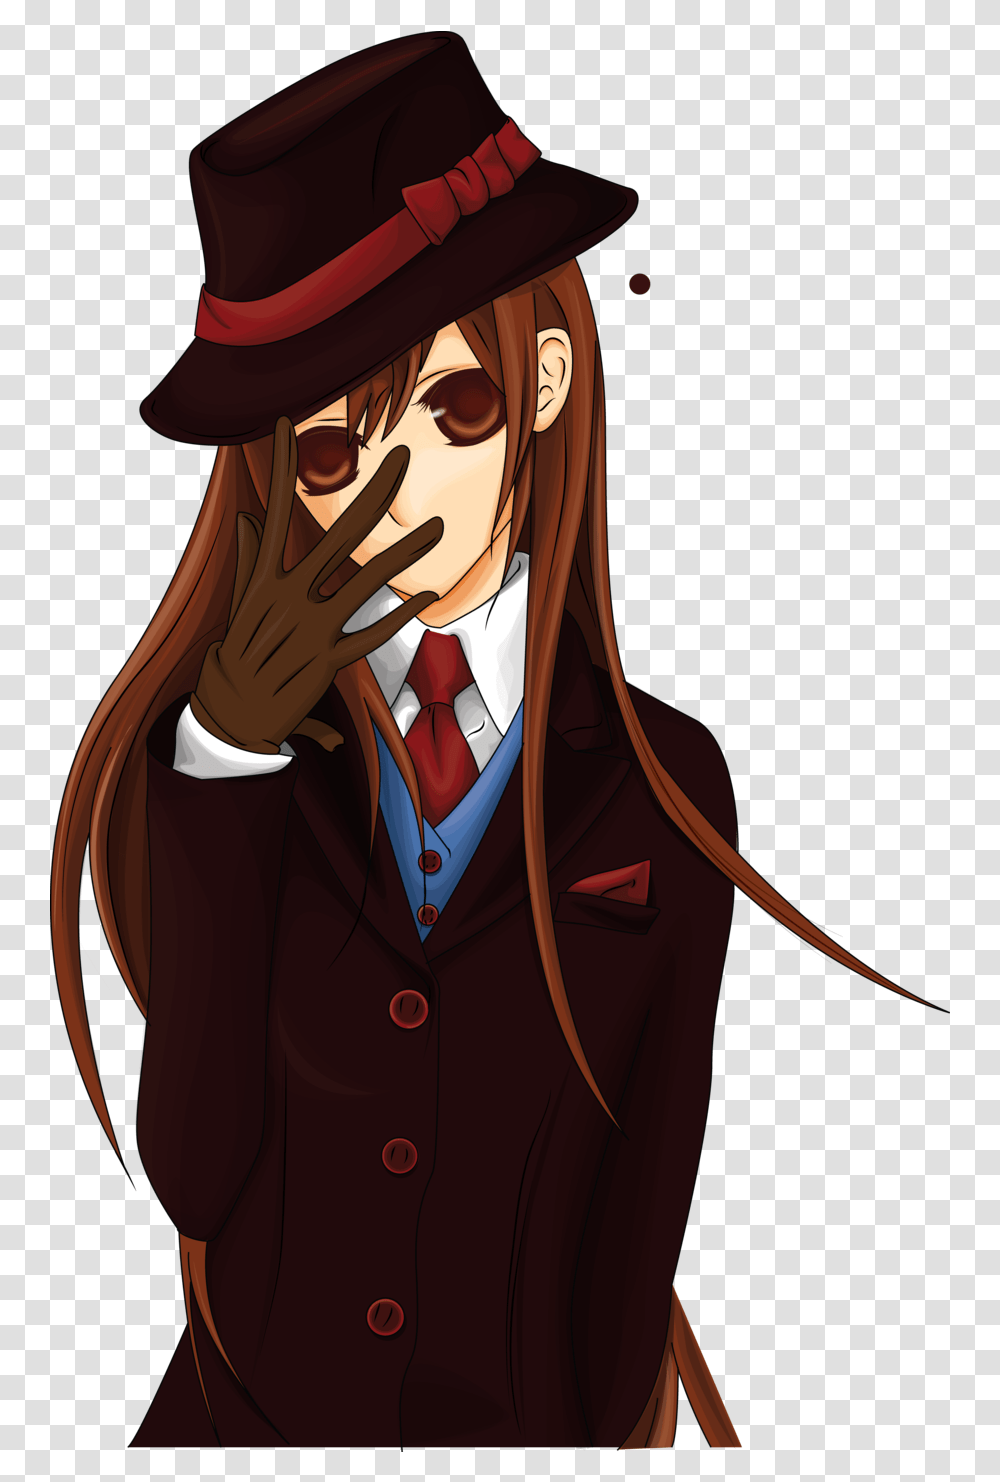 Download Anime Gangster Gangsta Drawing Gangster Anime Anime Mafia Boss Girl, Clothing, Person, Costume, Book Transparent Png